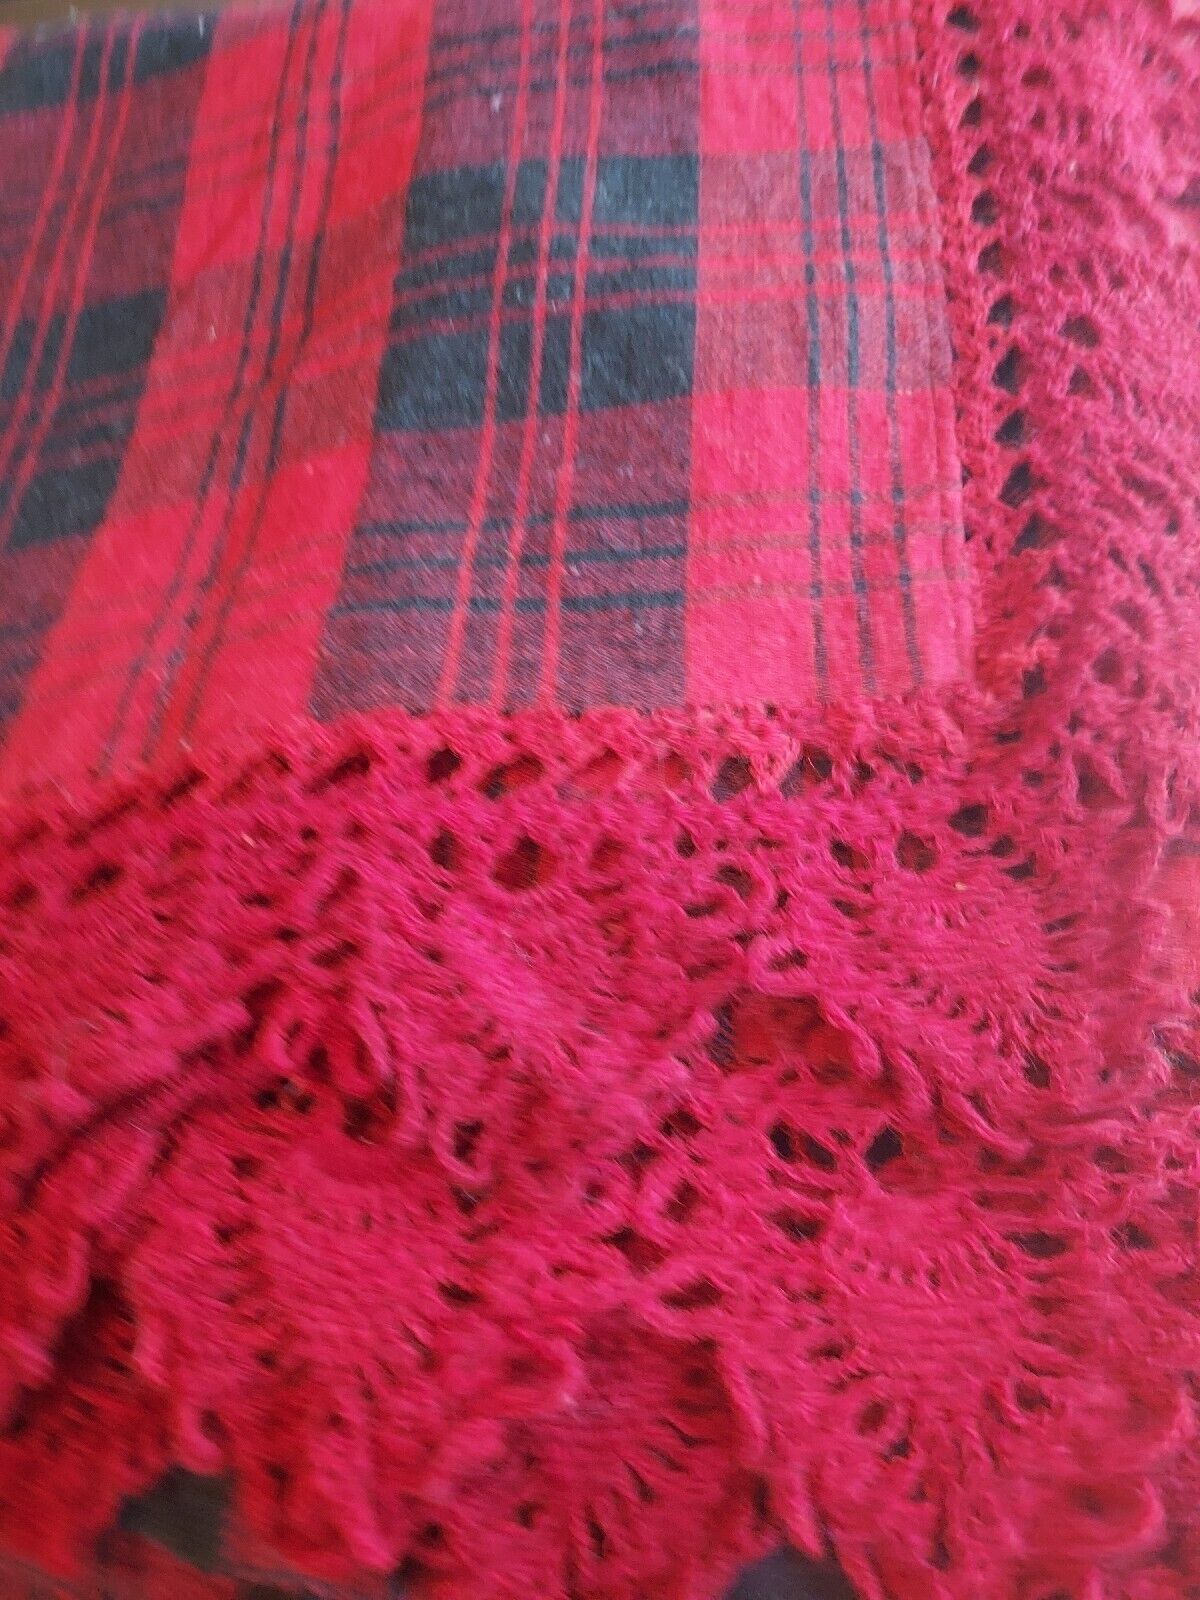 Vintage Wool Red Buffalo Plaid Coverlet Woven Seamed Red Hand Crochet Trim